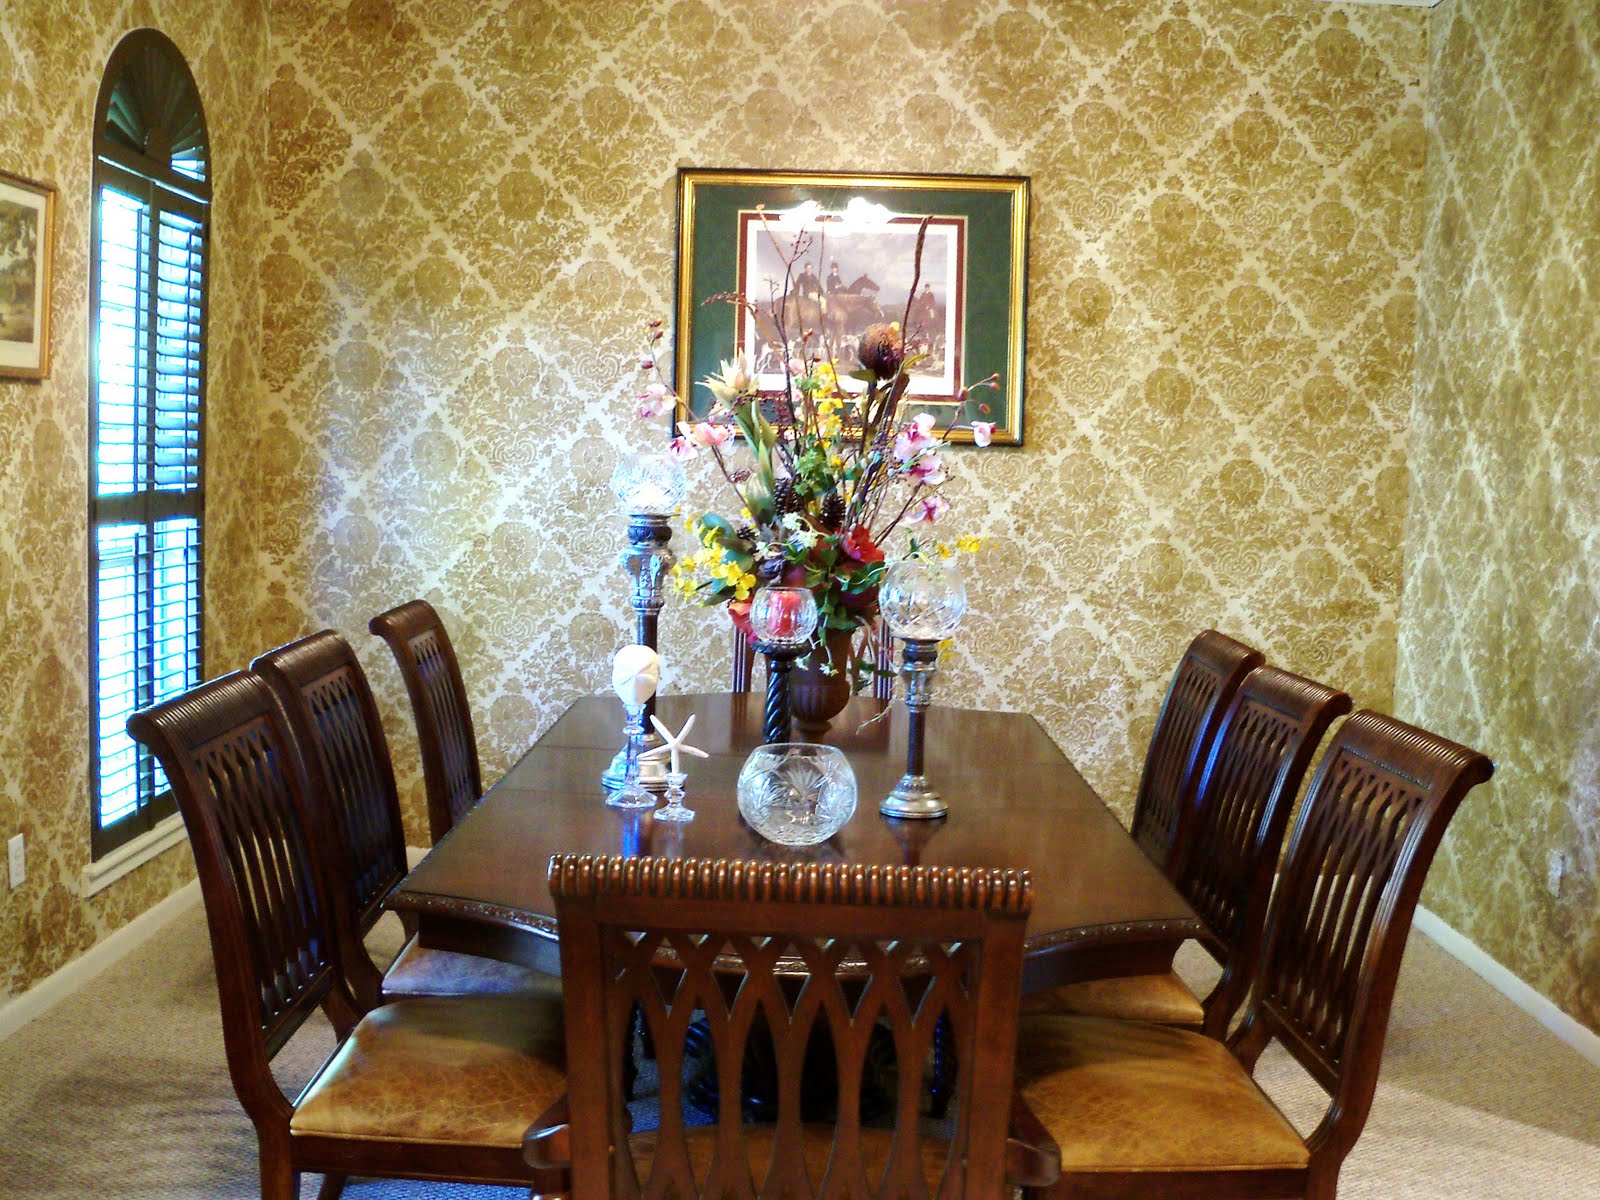 Wallpaper Ideas For Dining Room Photo   Dining Area   20x20 ...